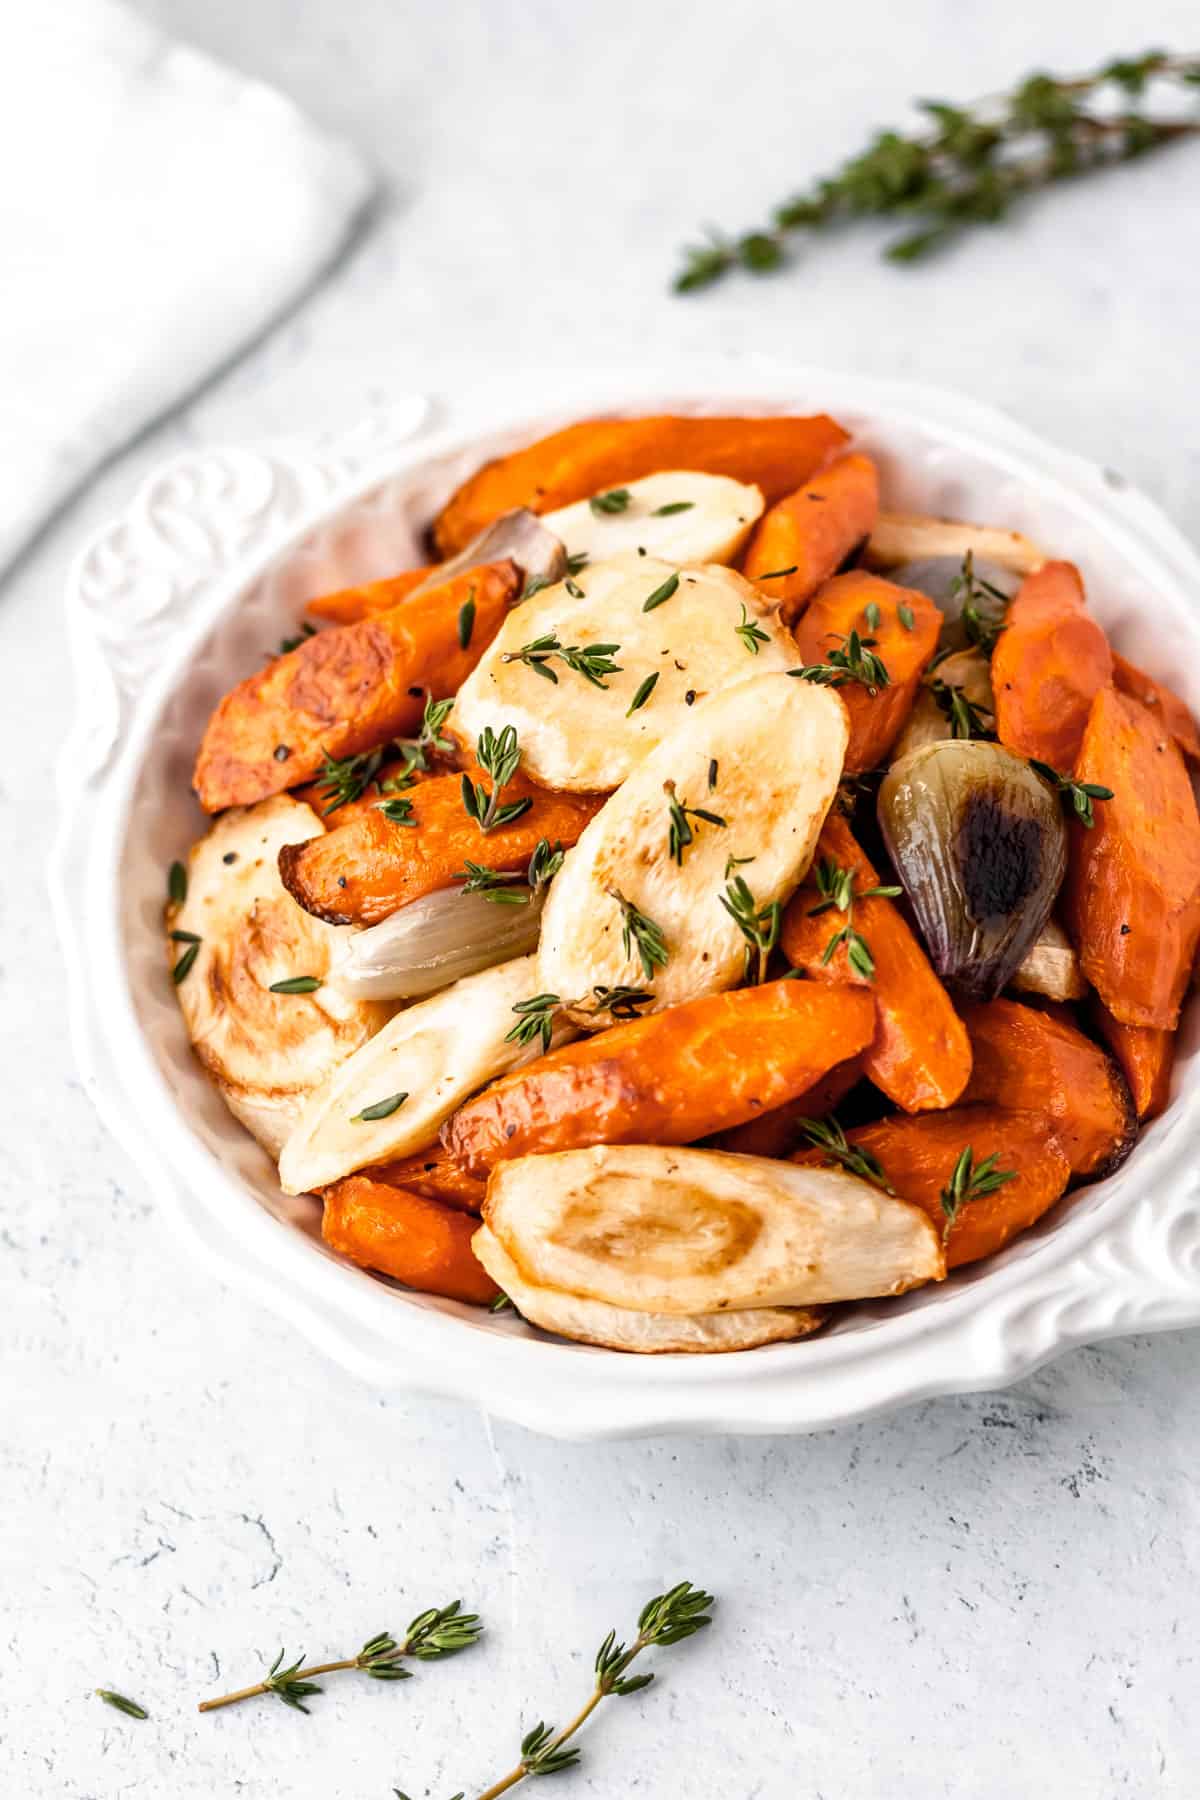 A white bowl filled with roasted carrots, parsnips, shallows and thyme with fresh sprigs of thyme around the bowl and a white towel in the background.